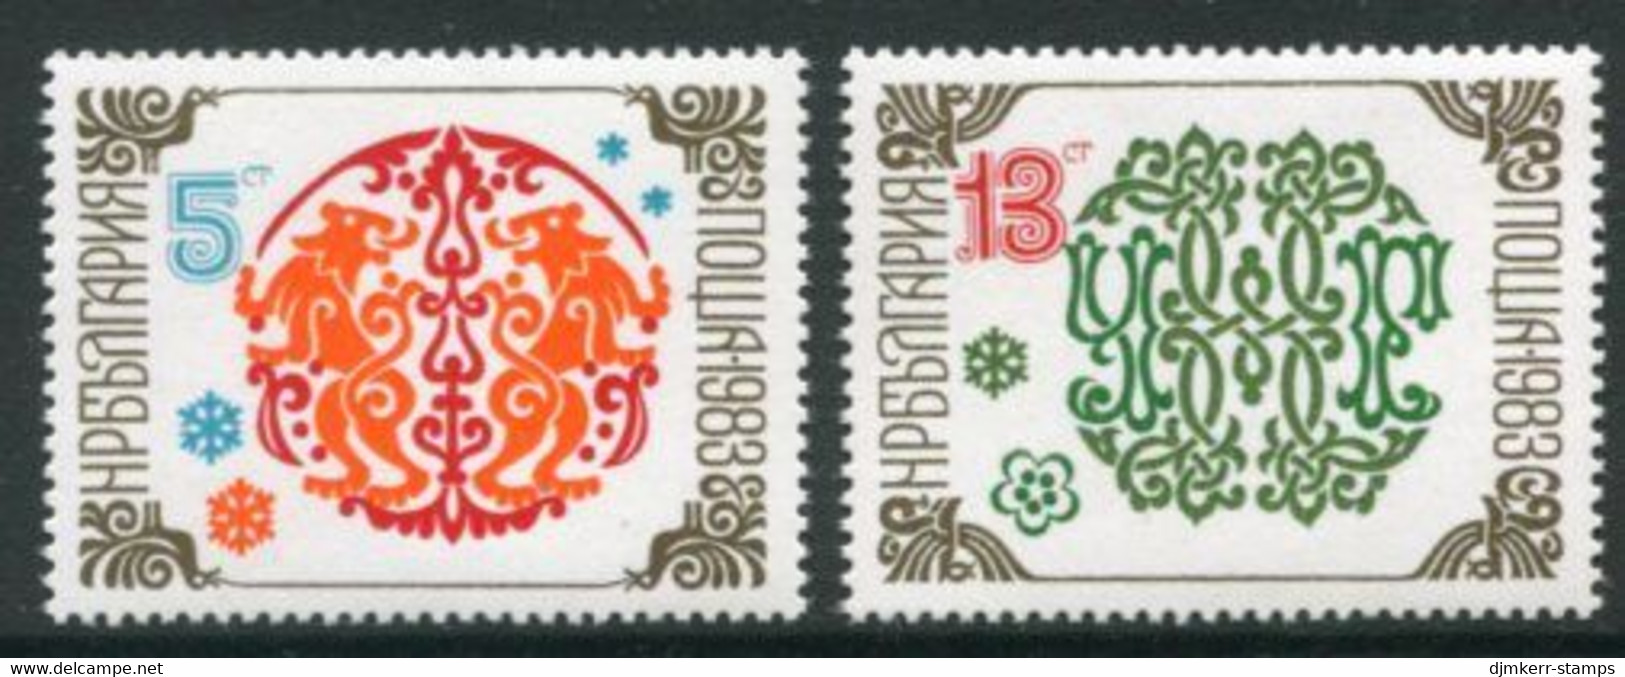 BULGARIA 1982 New Year MNH / **.  Michel 3150-51 - Unused Stamps